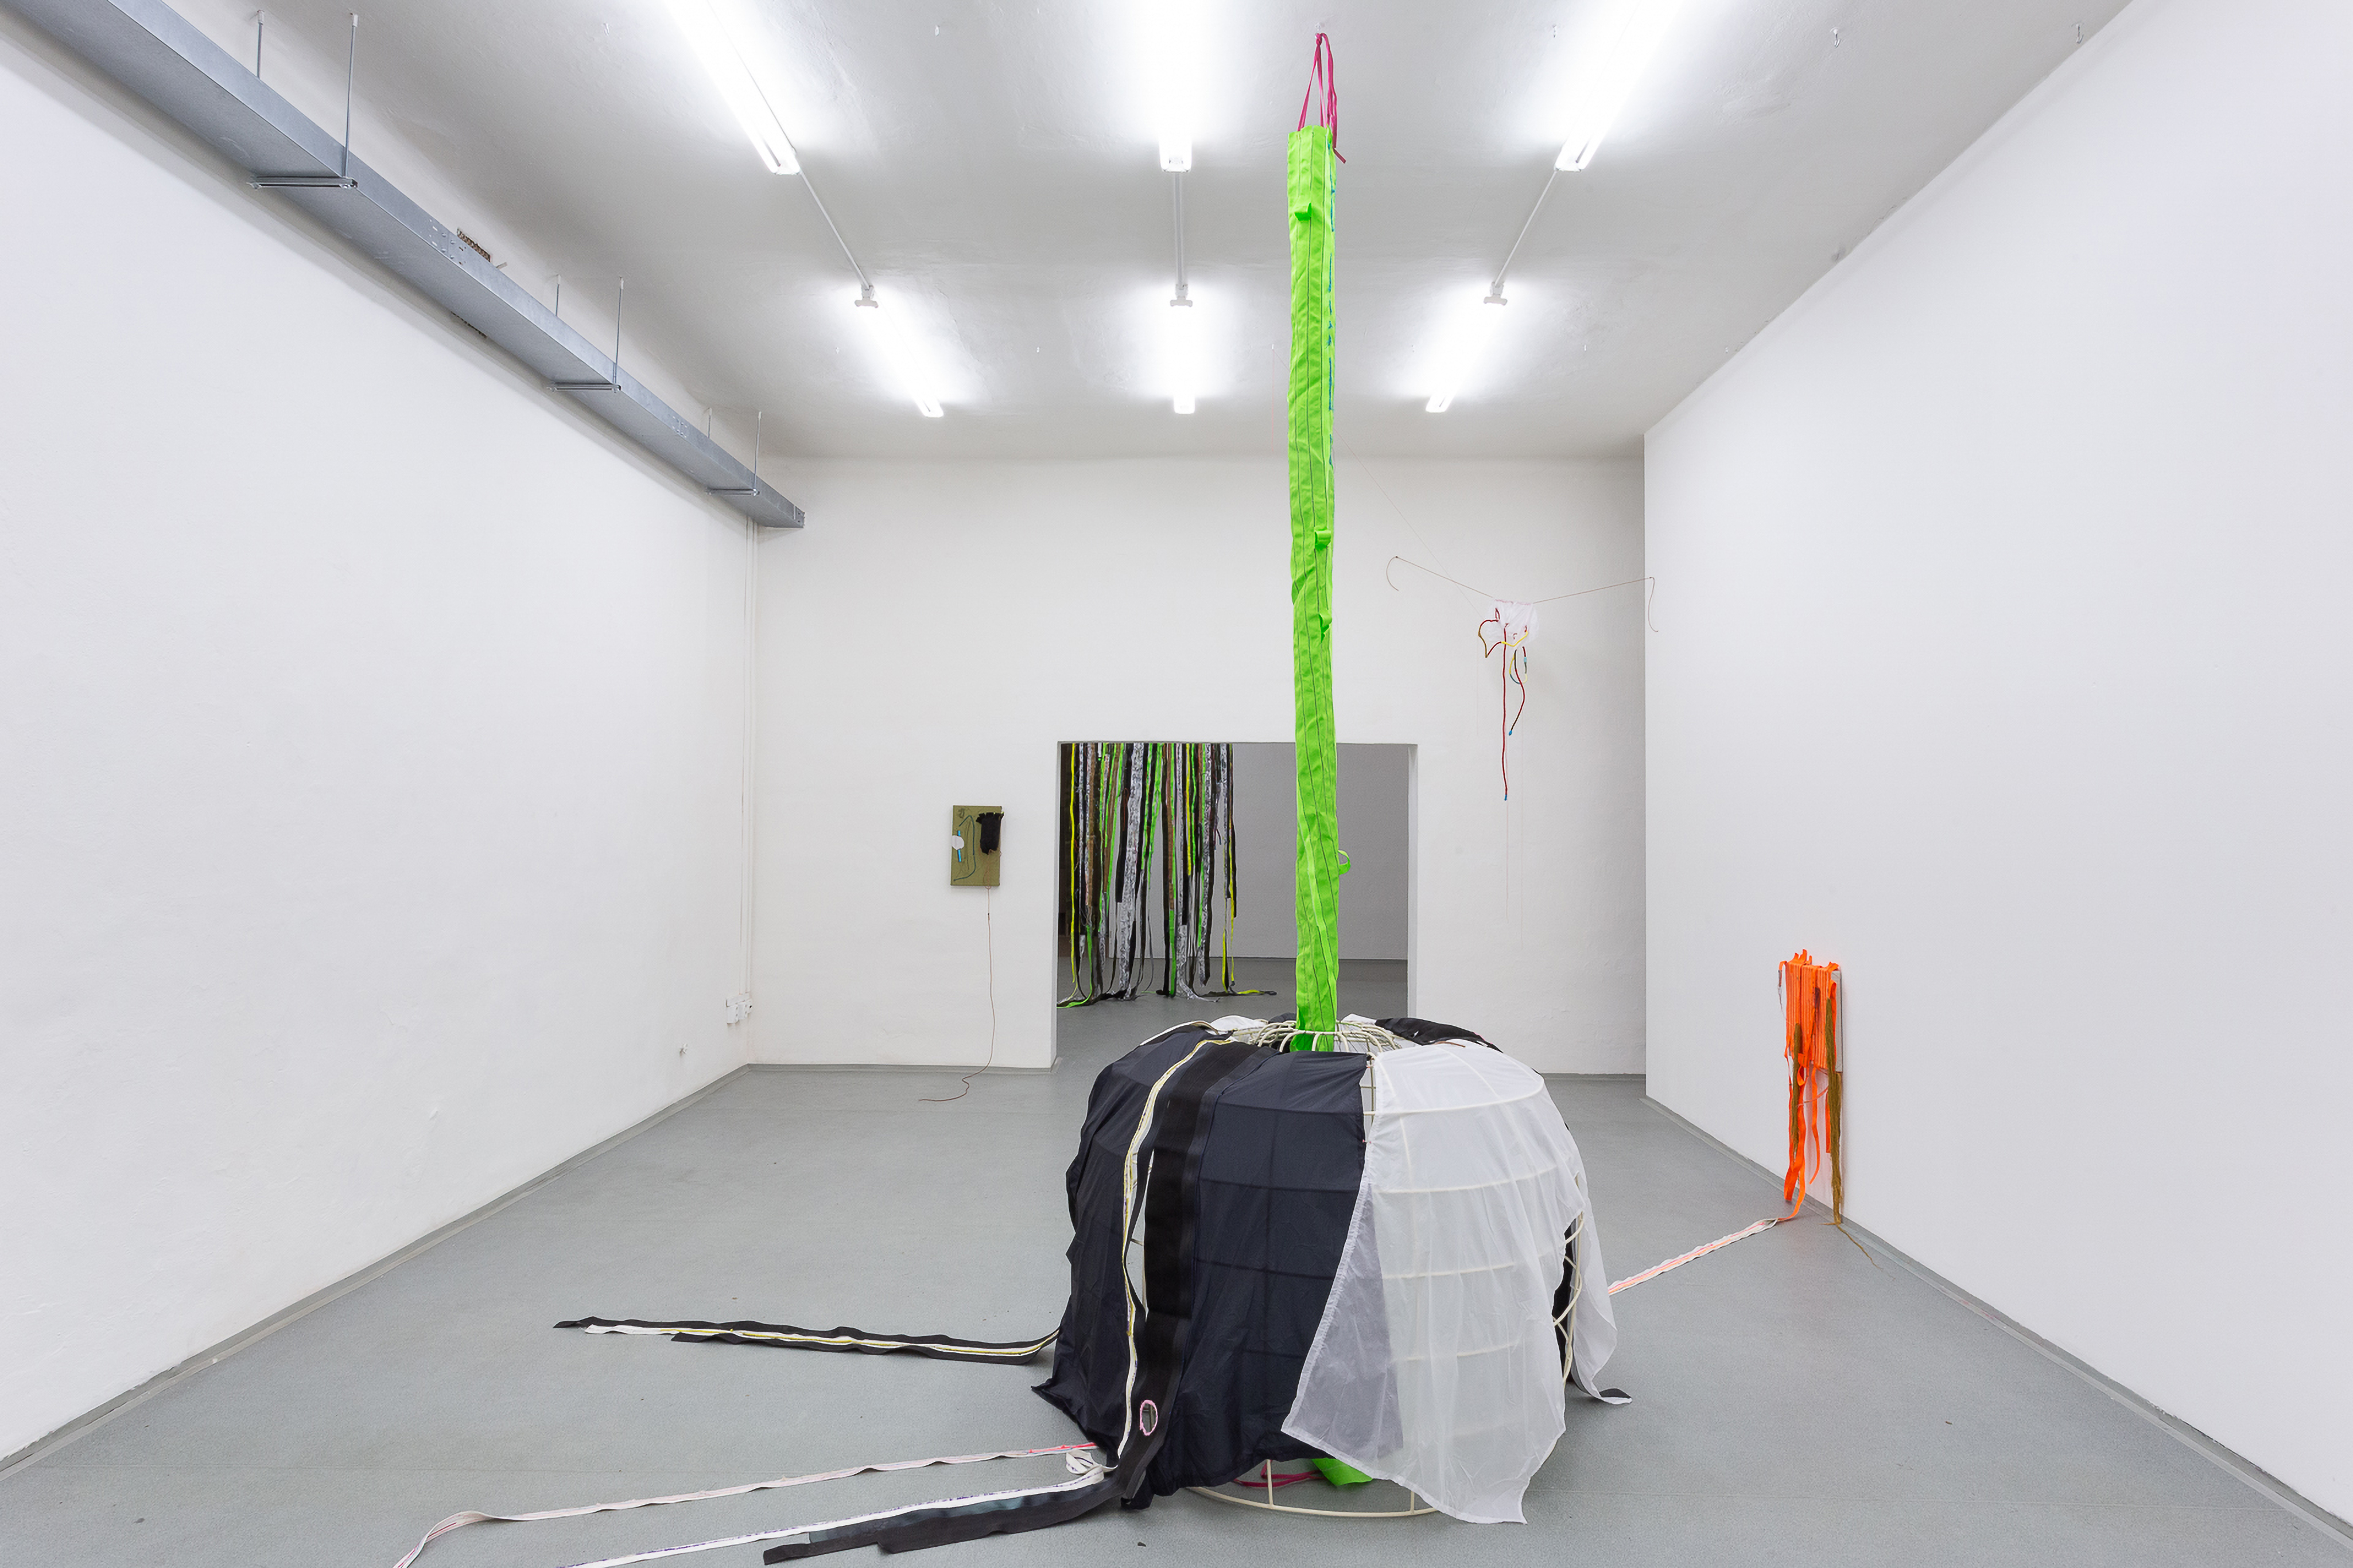 Photo of an art installation called Living Tent by Klára Čermáková (Galerie FaVu, Brno, Czechia, 2018) [Back view]. The central object in the photo is a metal skeleton covered with fabric (a kind of tent or shelter) sewn together from many smaller pieces of fabric/material. This cover then freely continues/spreads to different sides of the room, up to some stitched paintings (hung on the walls) or ceiling.